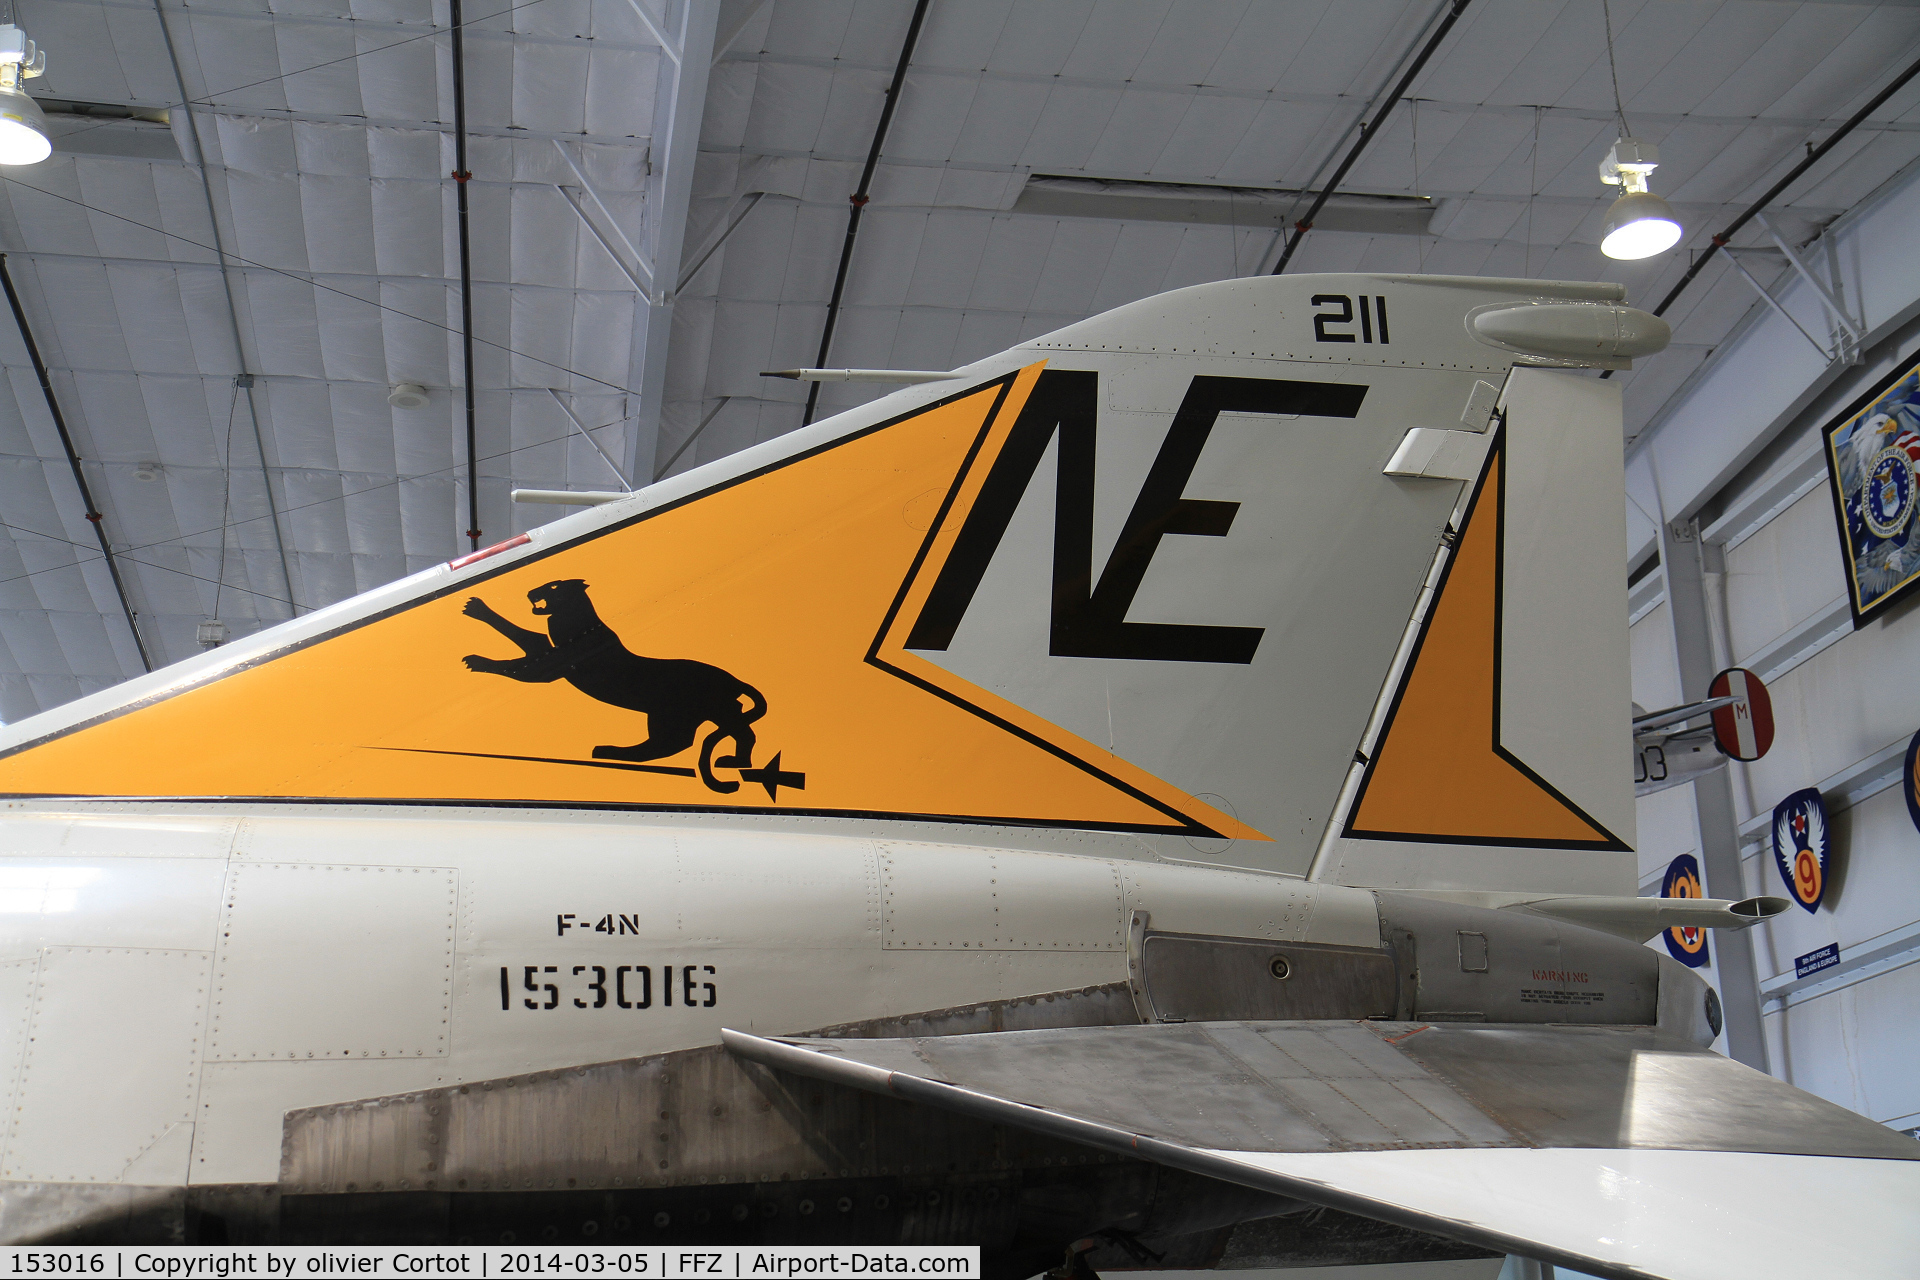 153016, McDonnell F-4N Phantom II C/N 1496, tail details view. On loan from the Pima air museum